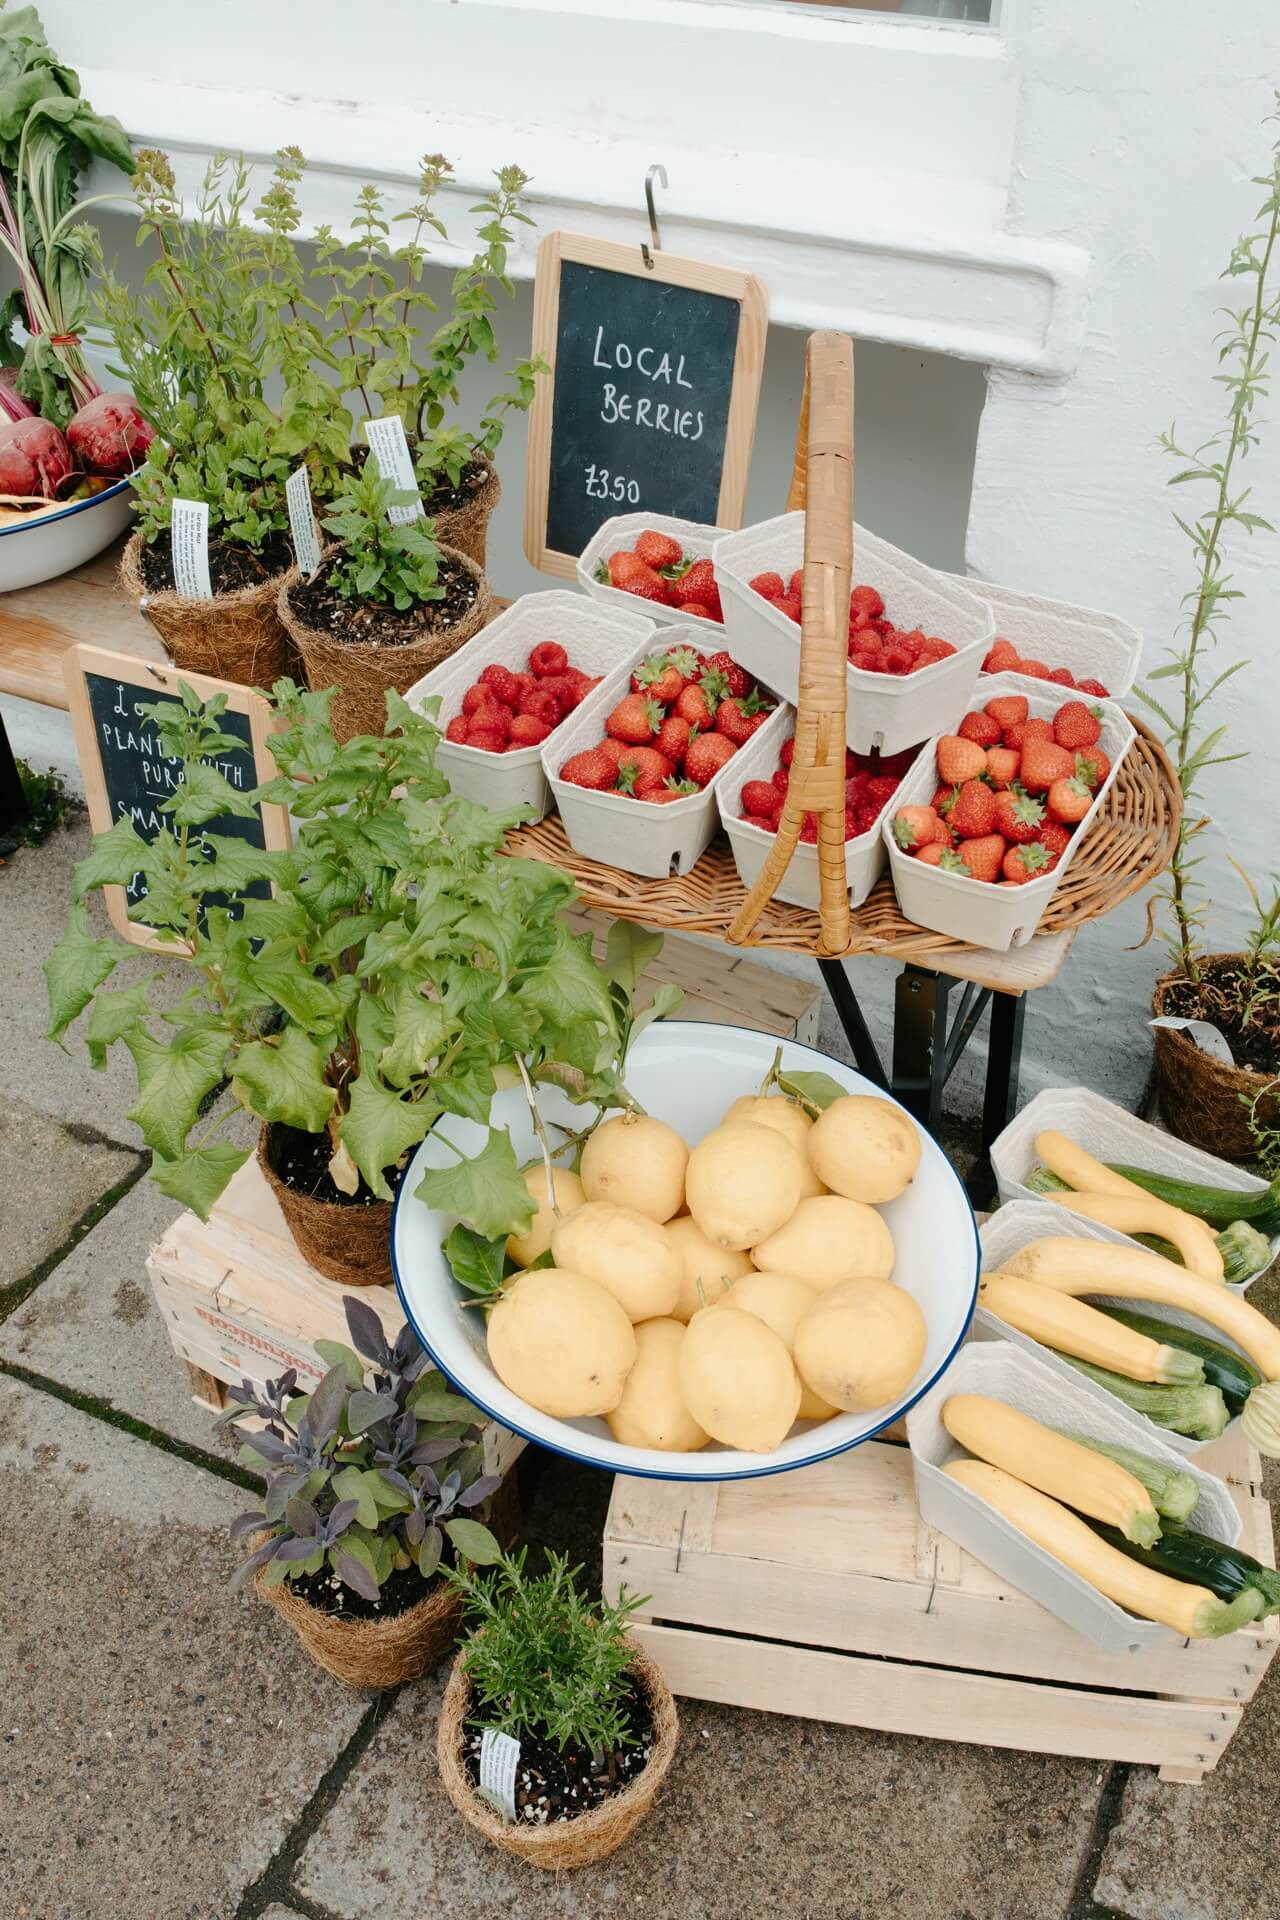 local produce for sale at Lon Store in Dunkeld, Scotland